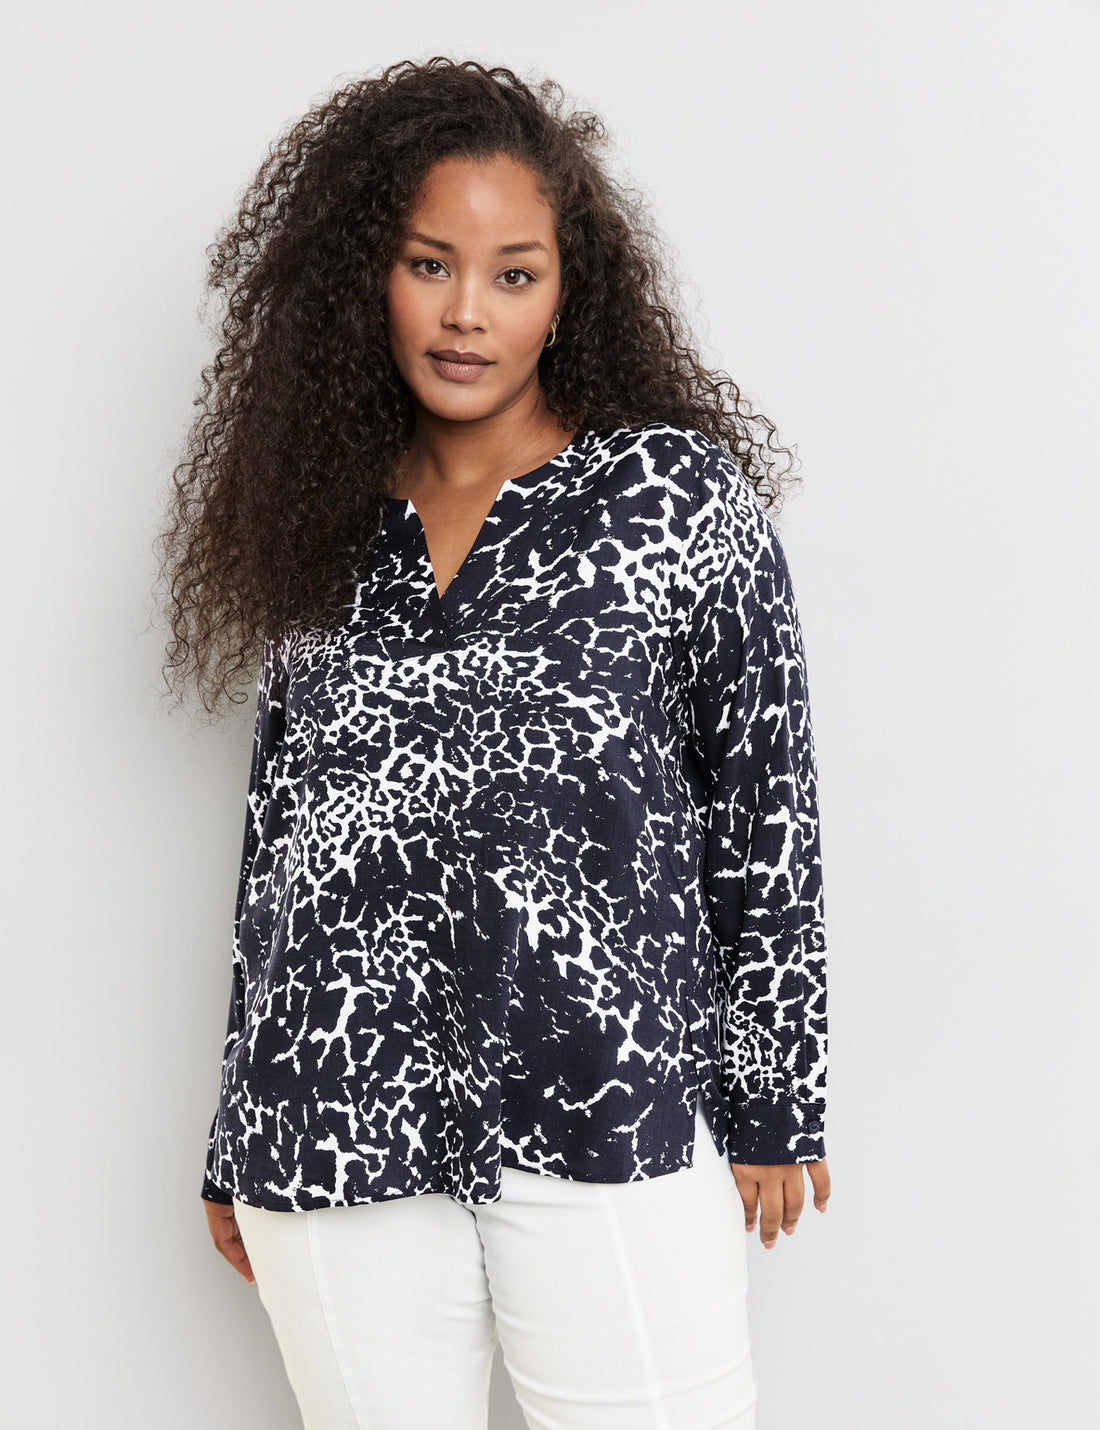 Tunic With An All-Over Print_960988-29143_8102_01